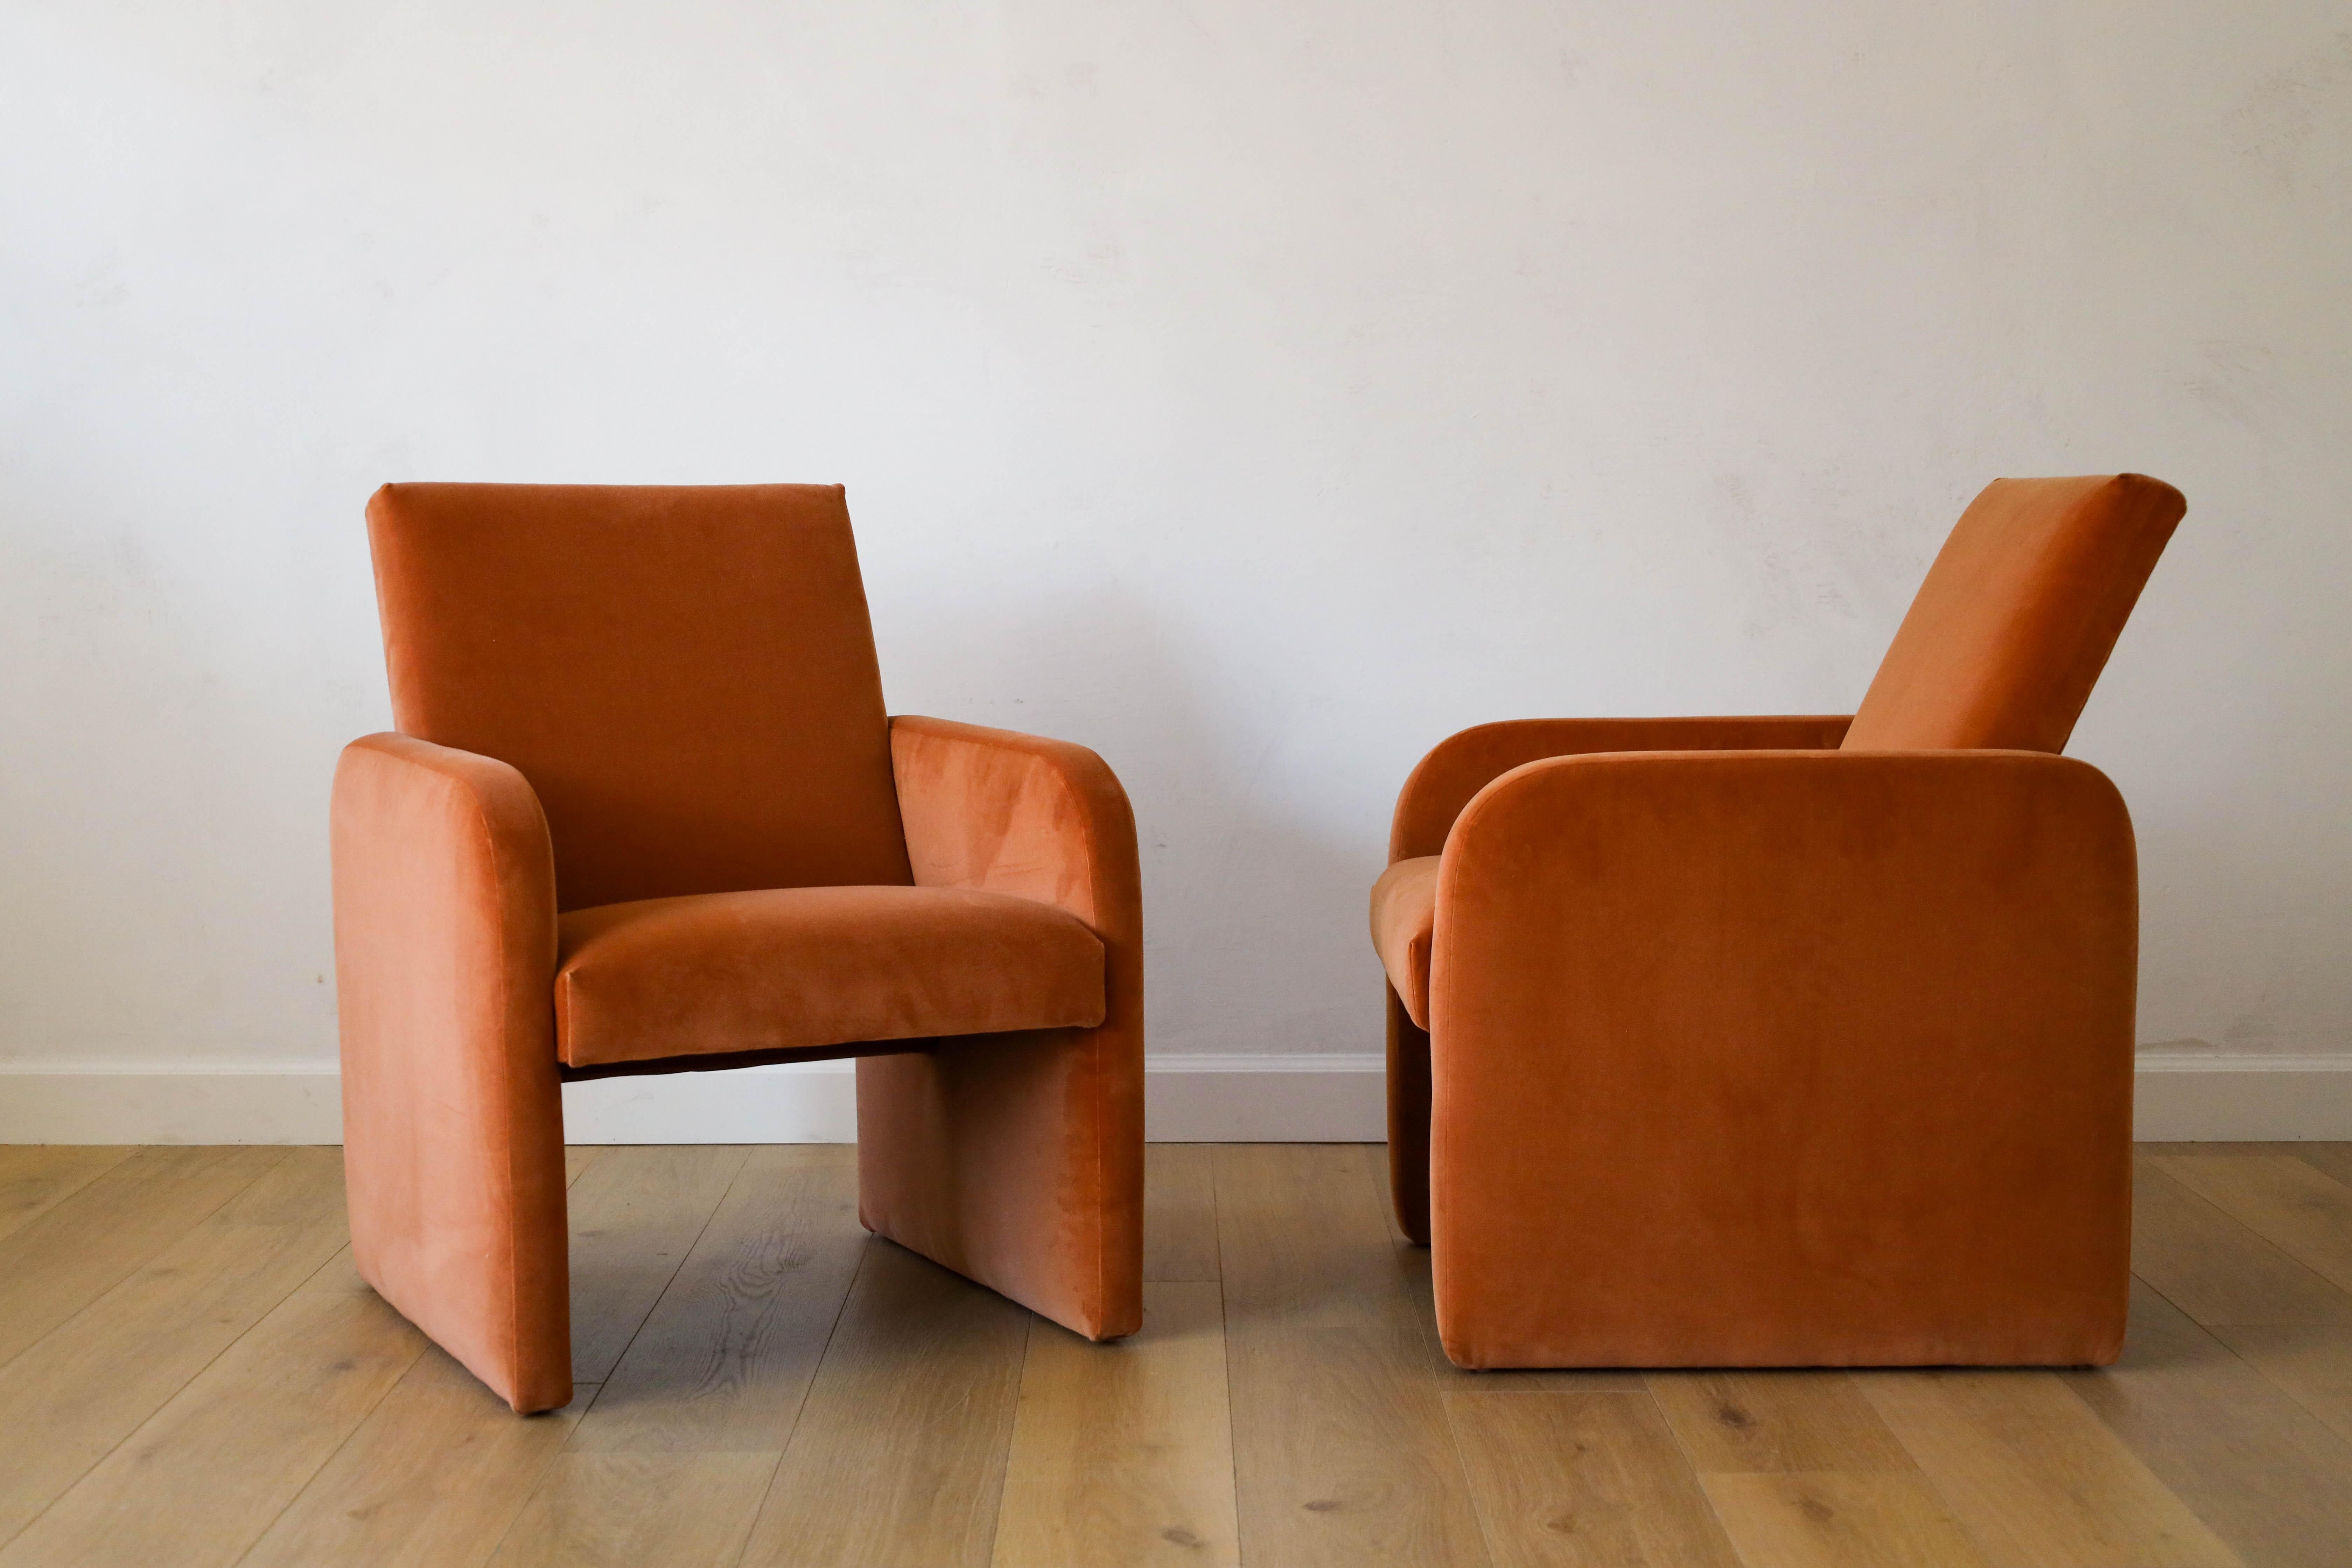 Postmodern Pair of Chairs in Performance Velvet Fabrics, Prague 1970s In Excellent Condition For Sale In Dallas, TX